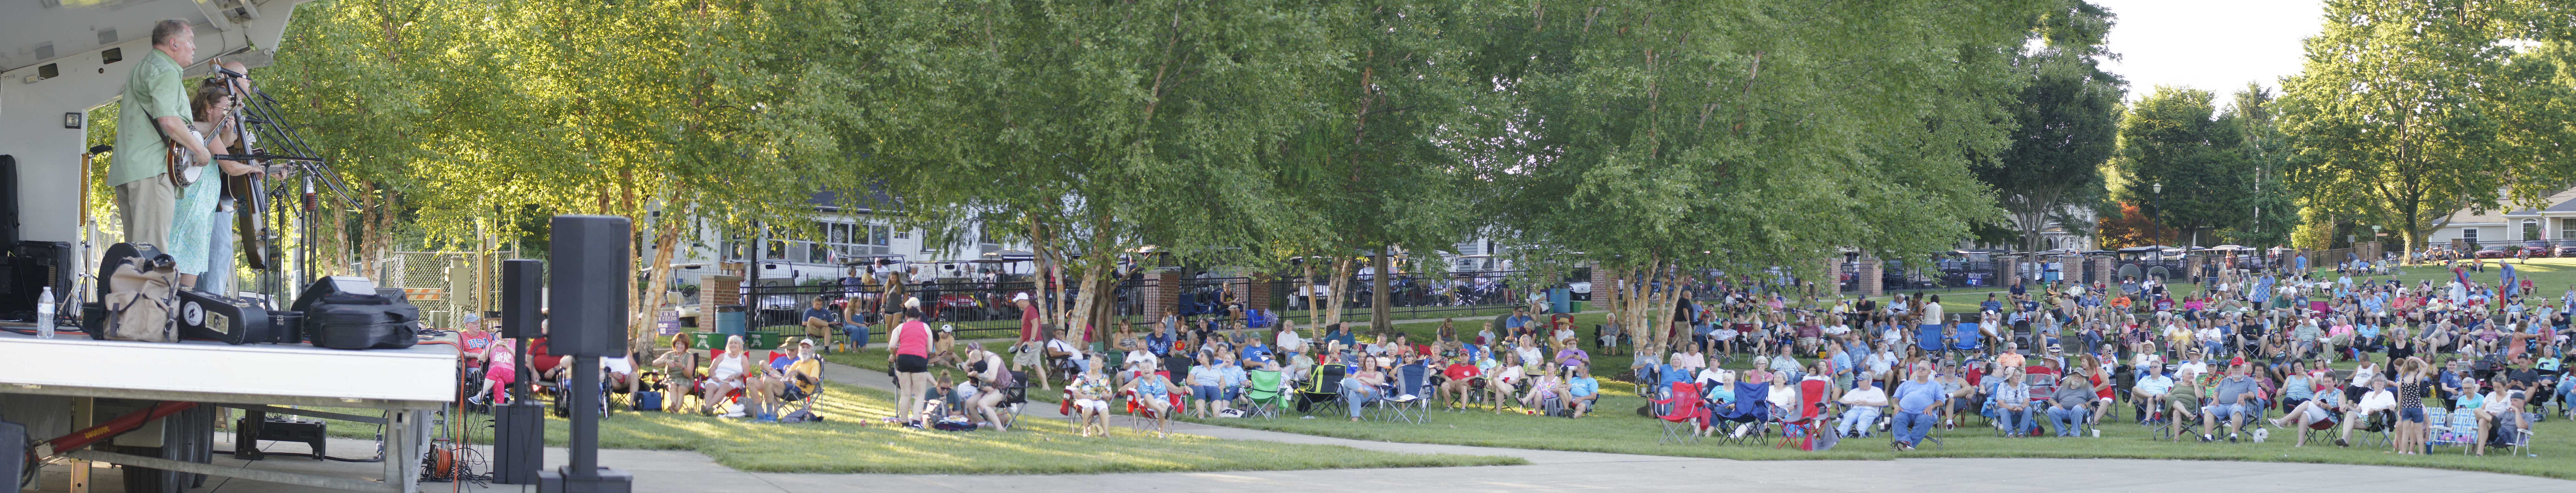 Music-in-the-Park-Madison-Indiana